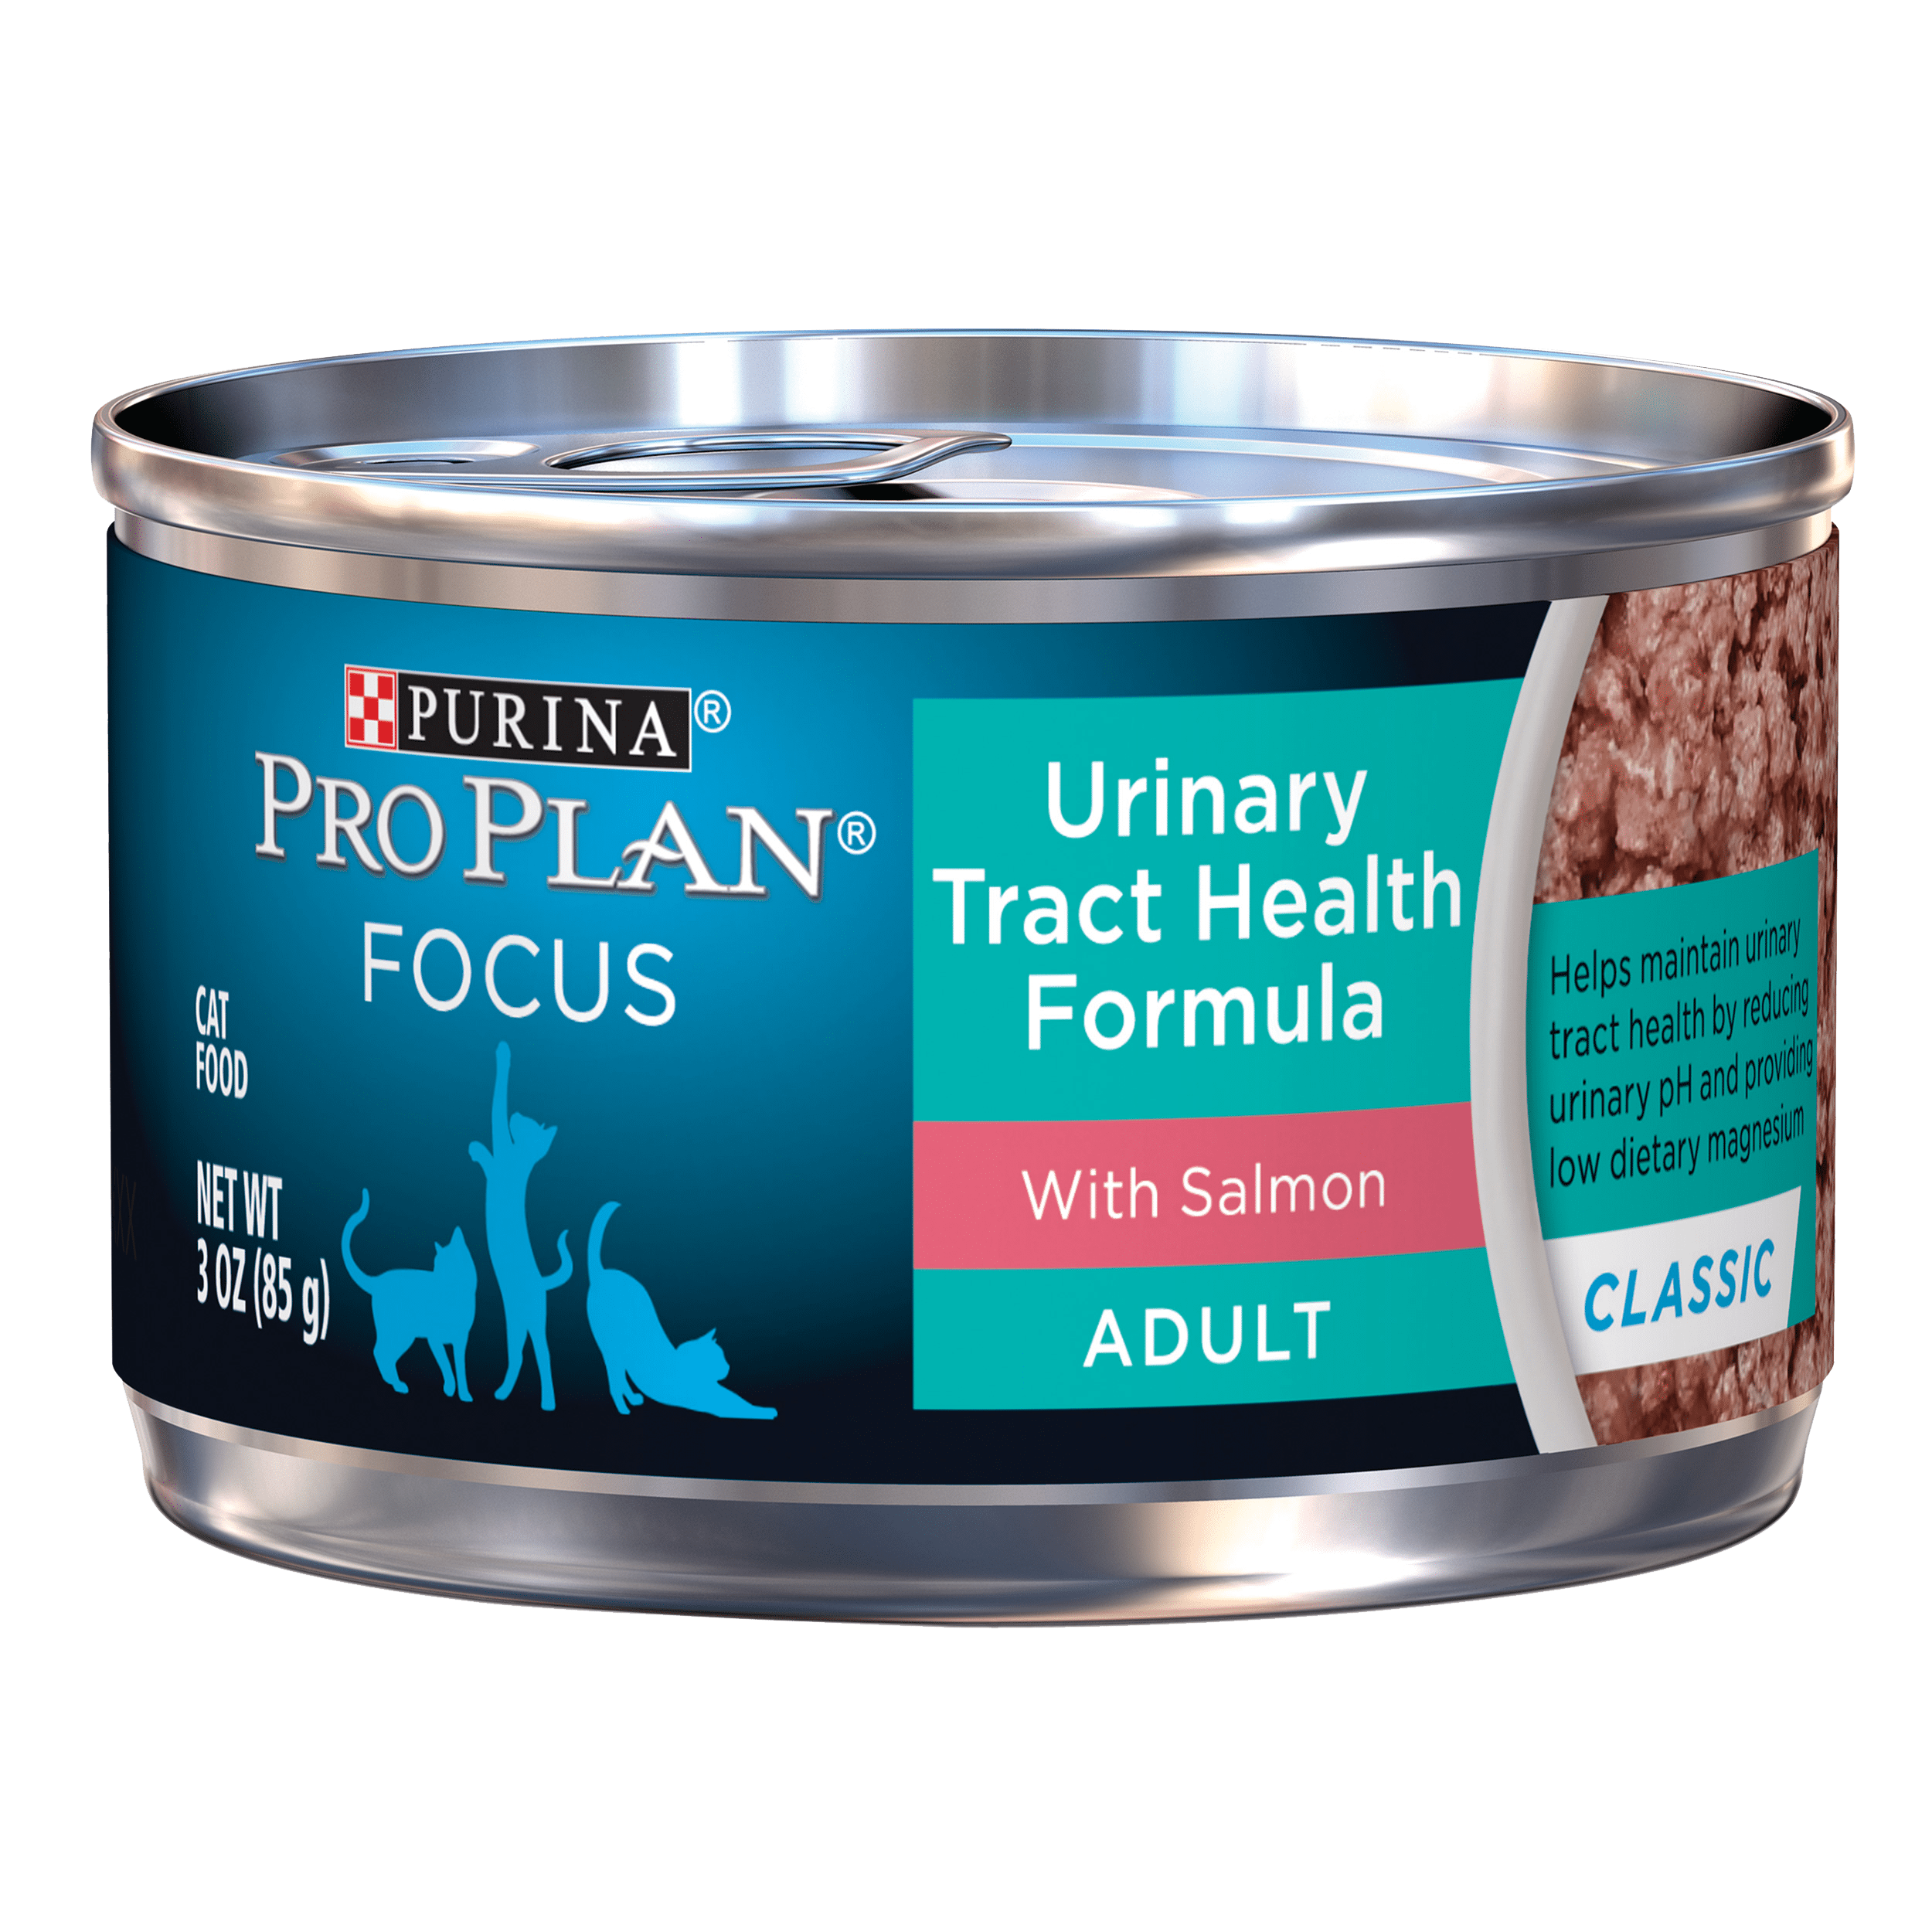 (24 Pack) Purina Pro Plan Urinary Tract Health Pate Wet Cat Food, FOCUS